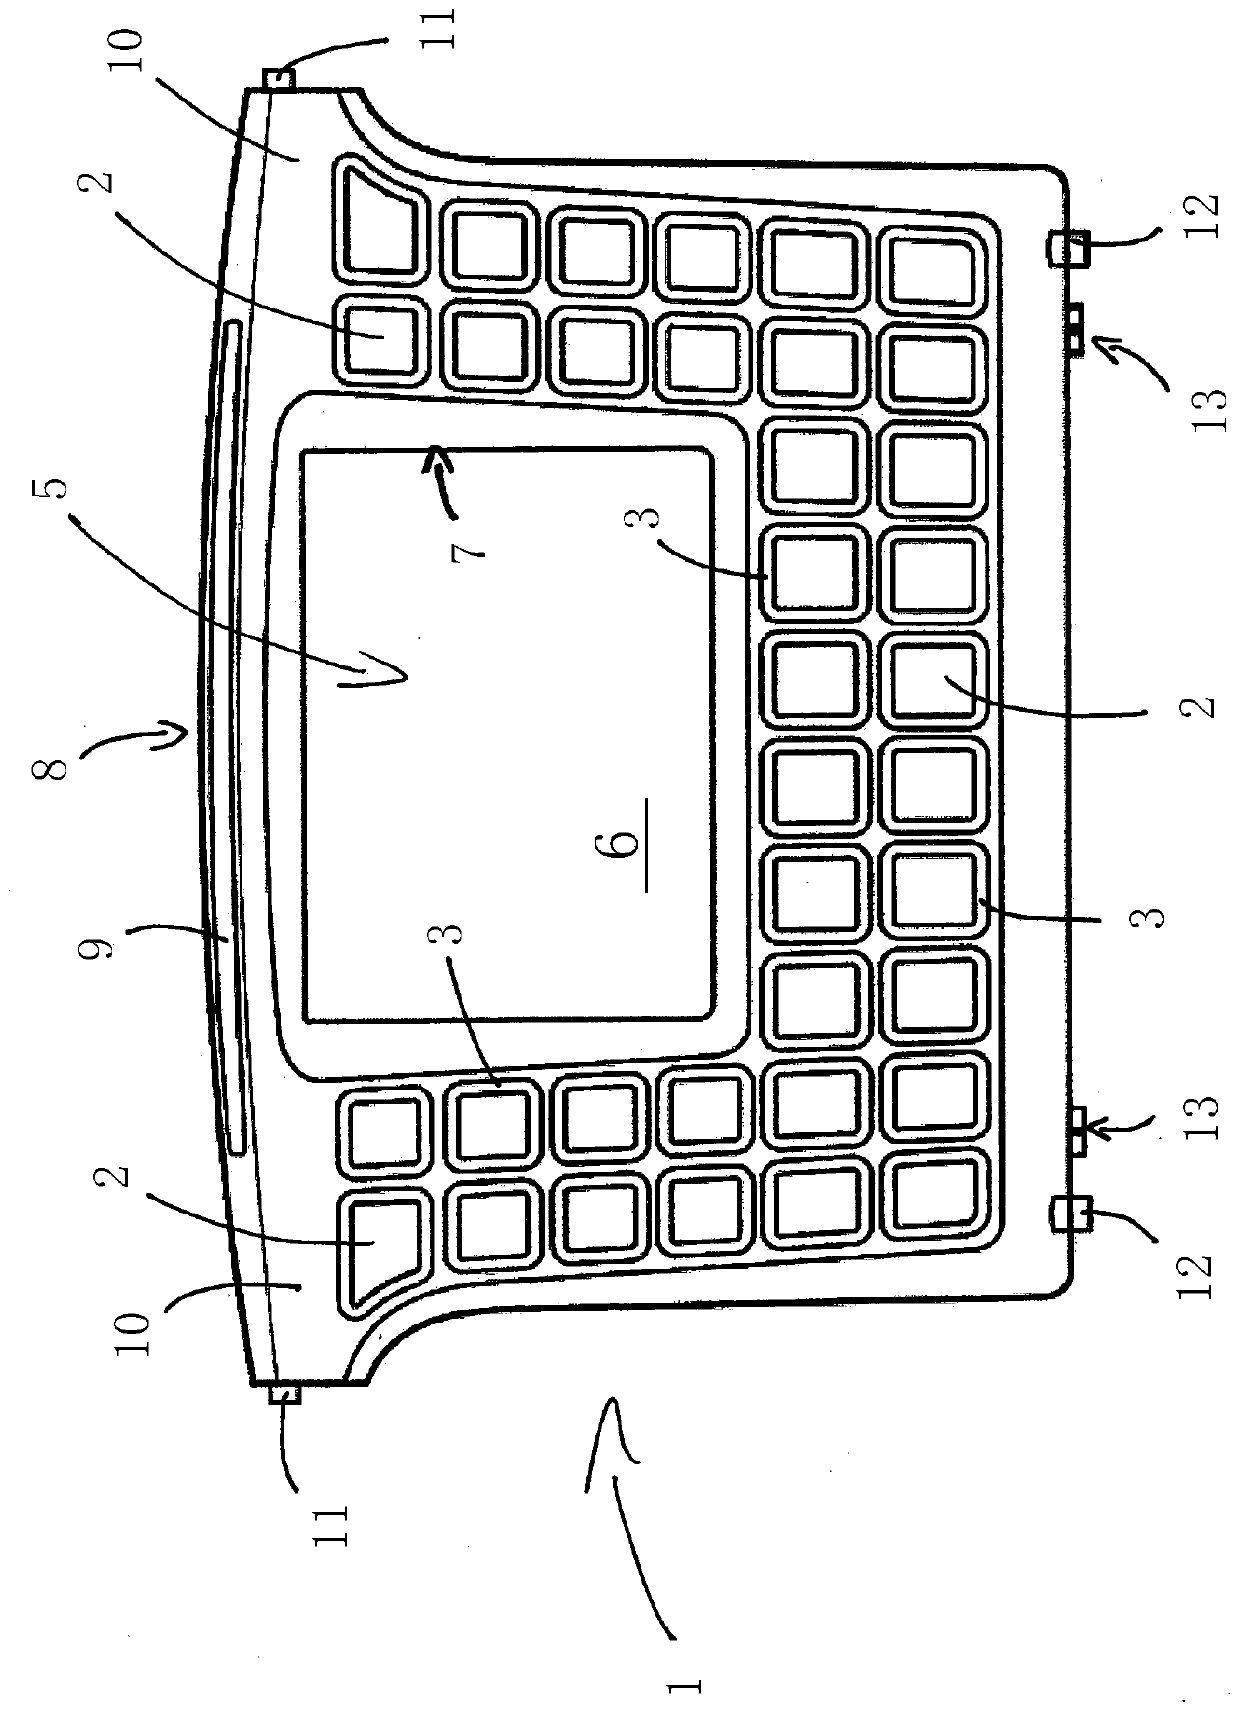 Dividing element for subdividing the interior of a wire basket